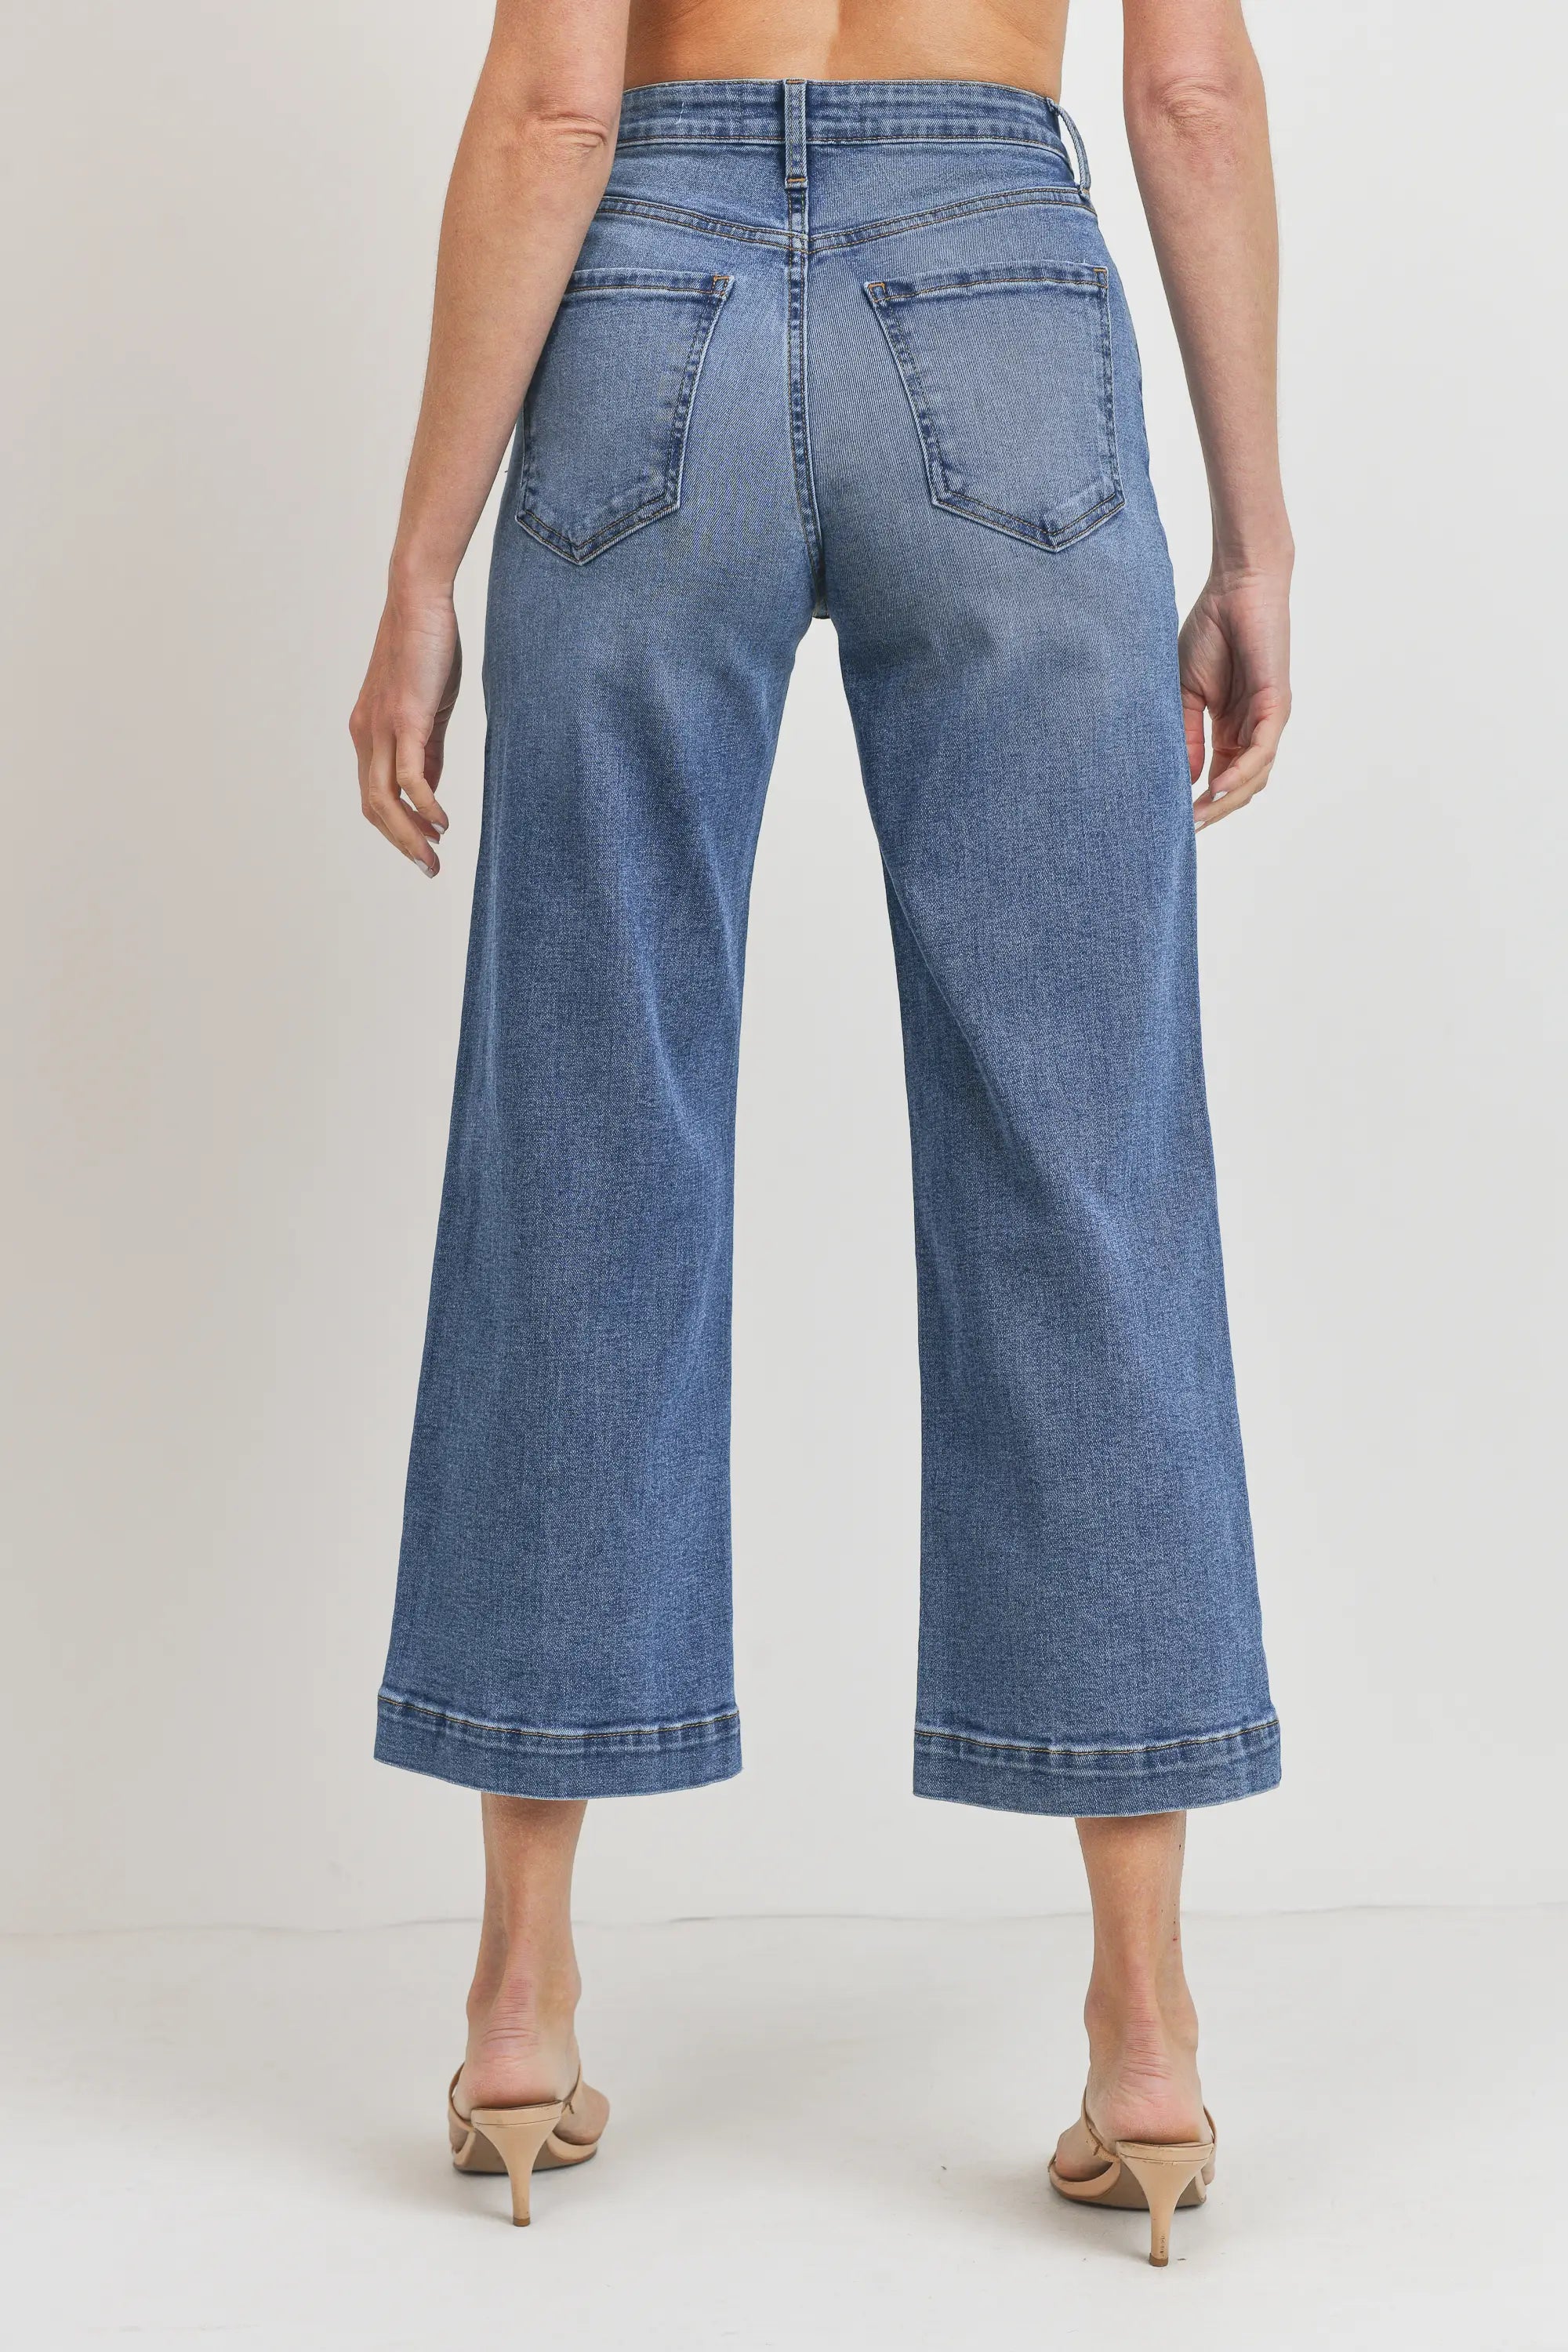 The Brandy Cropped Wide Leg Jeans by Just Black Denim